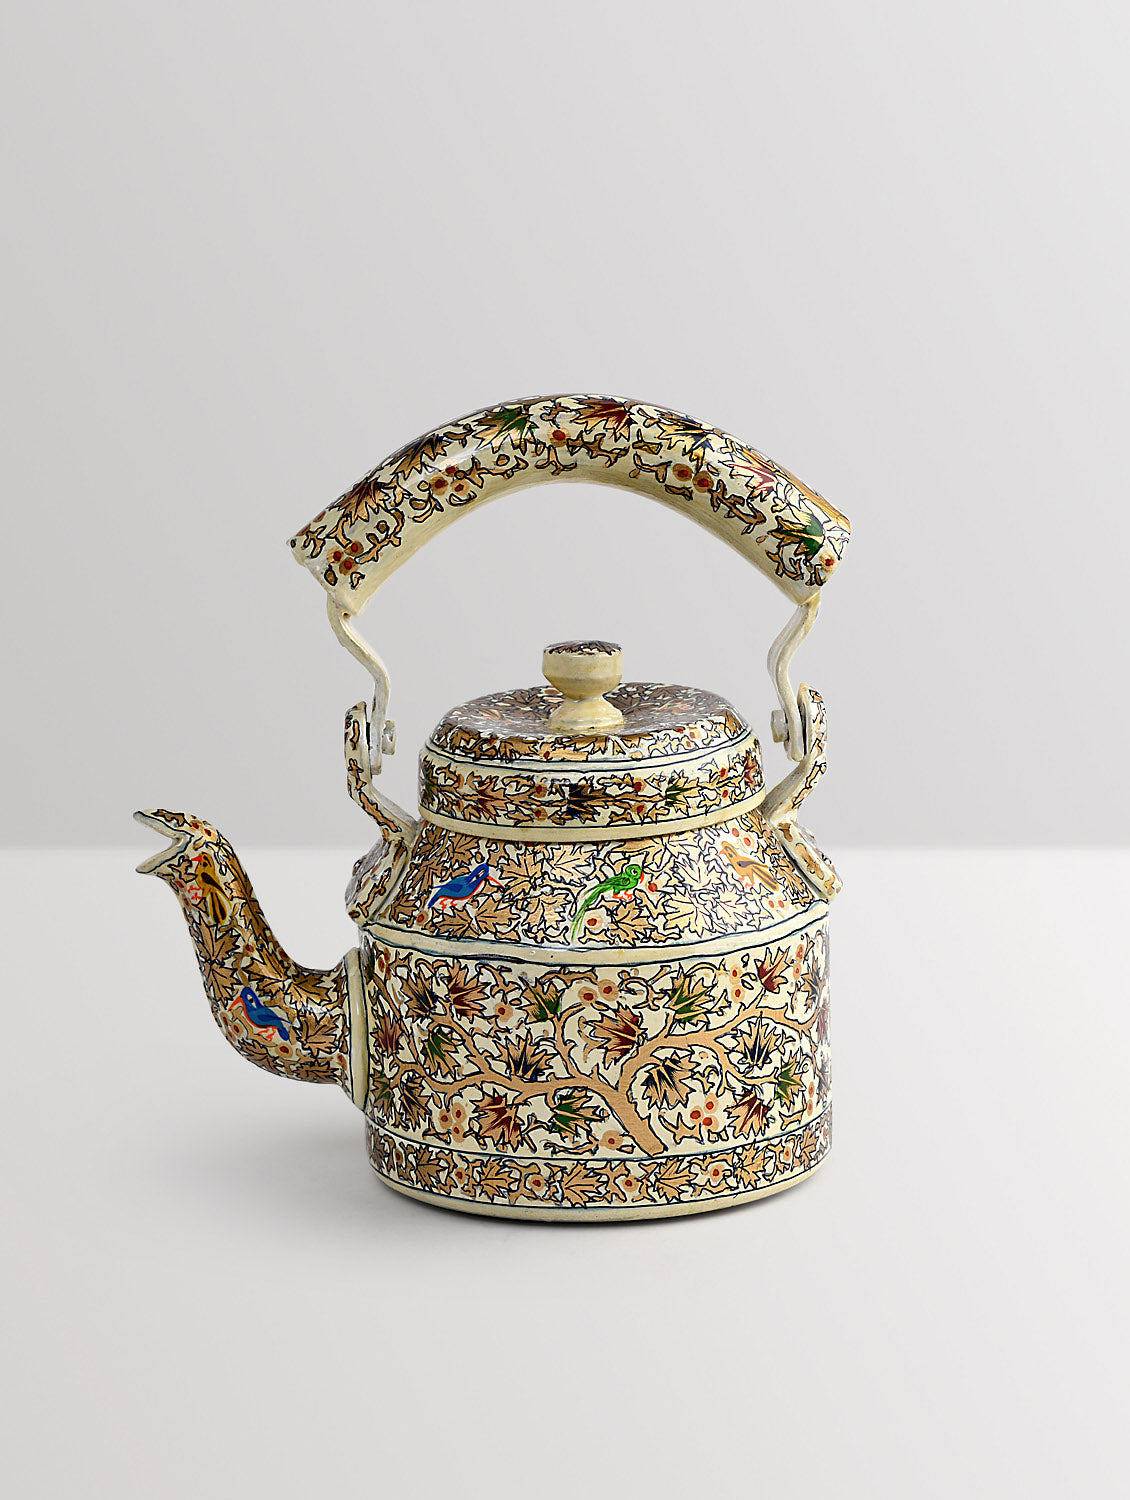 Hand Painted Kettle : "Chinar" The Oak Tree Art Of Kashmir